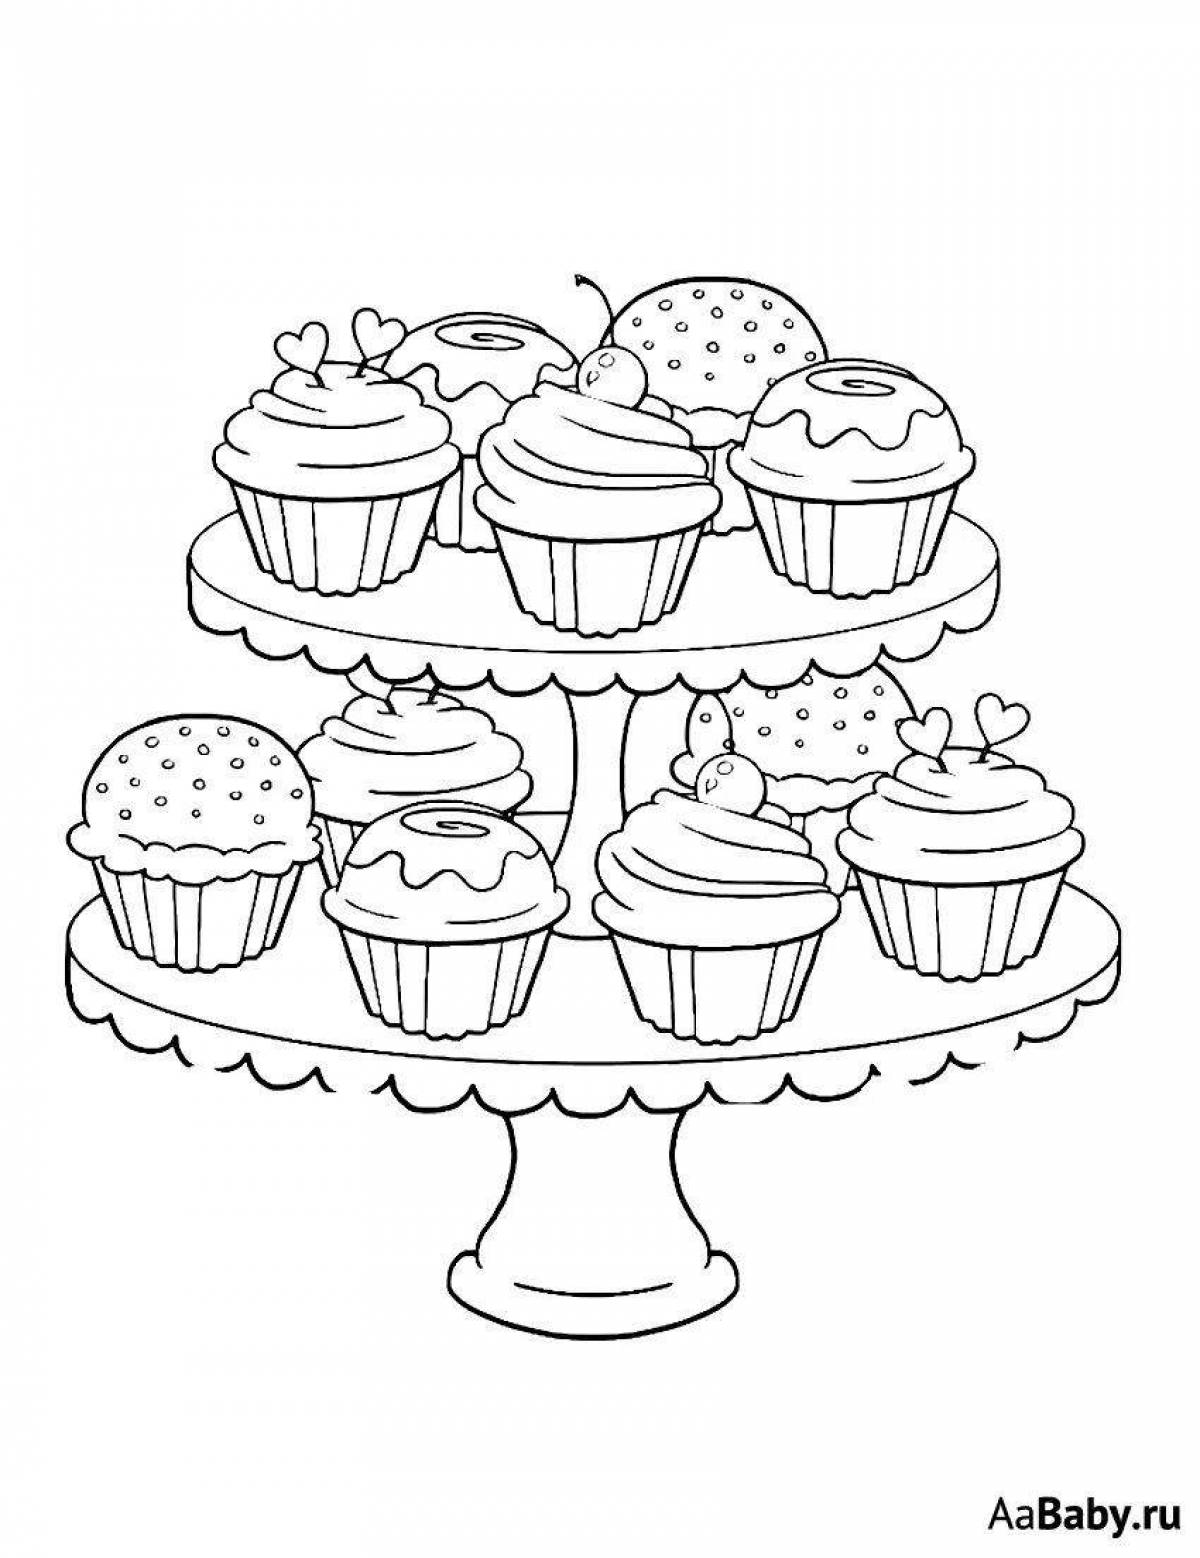 Pretty sweets coloring pages for girls